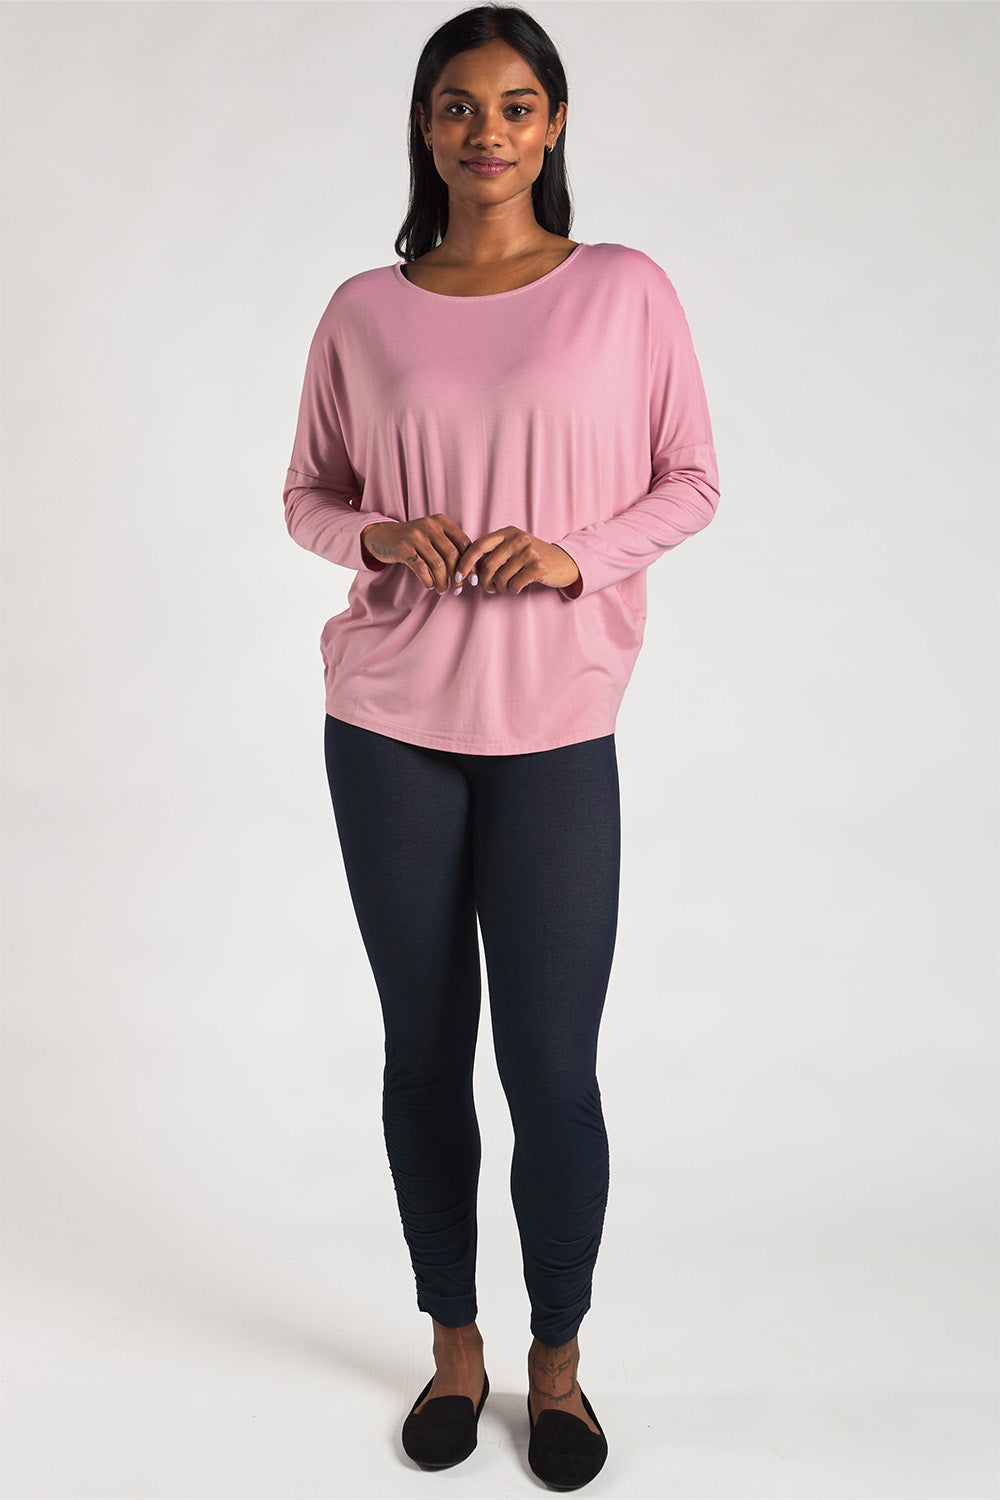 Woman styling a sustainable bamboo dolman sleeve top in Pink by Terrera.